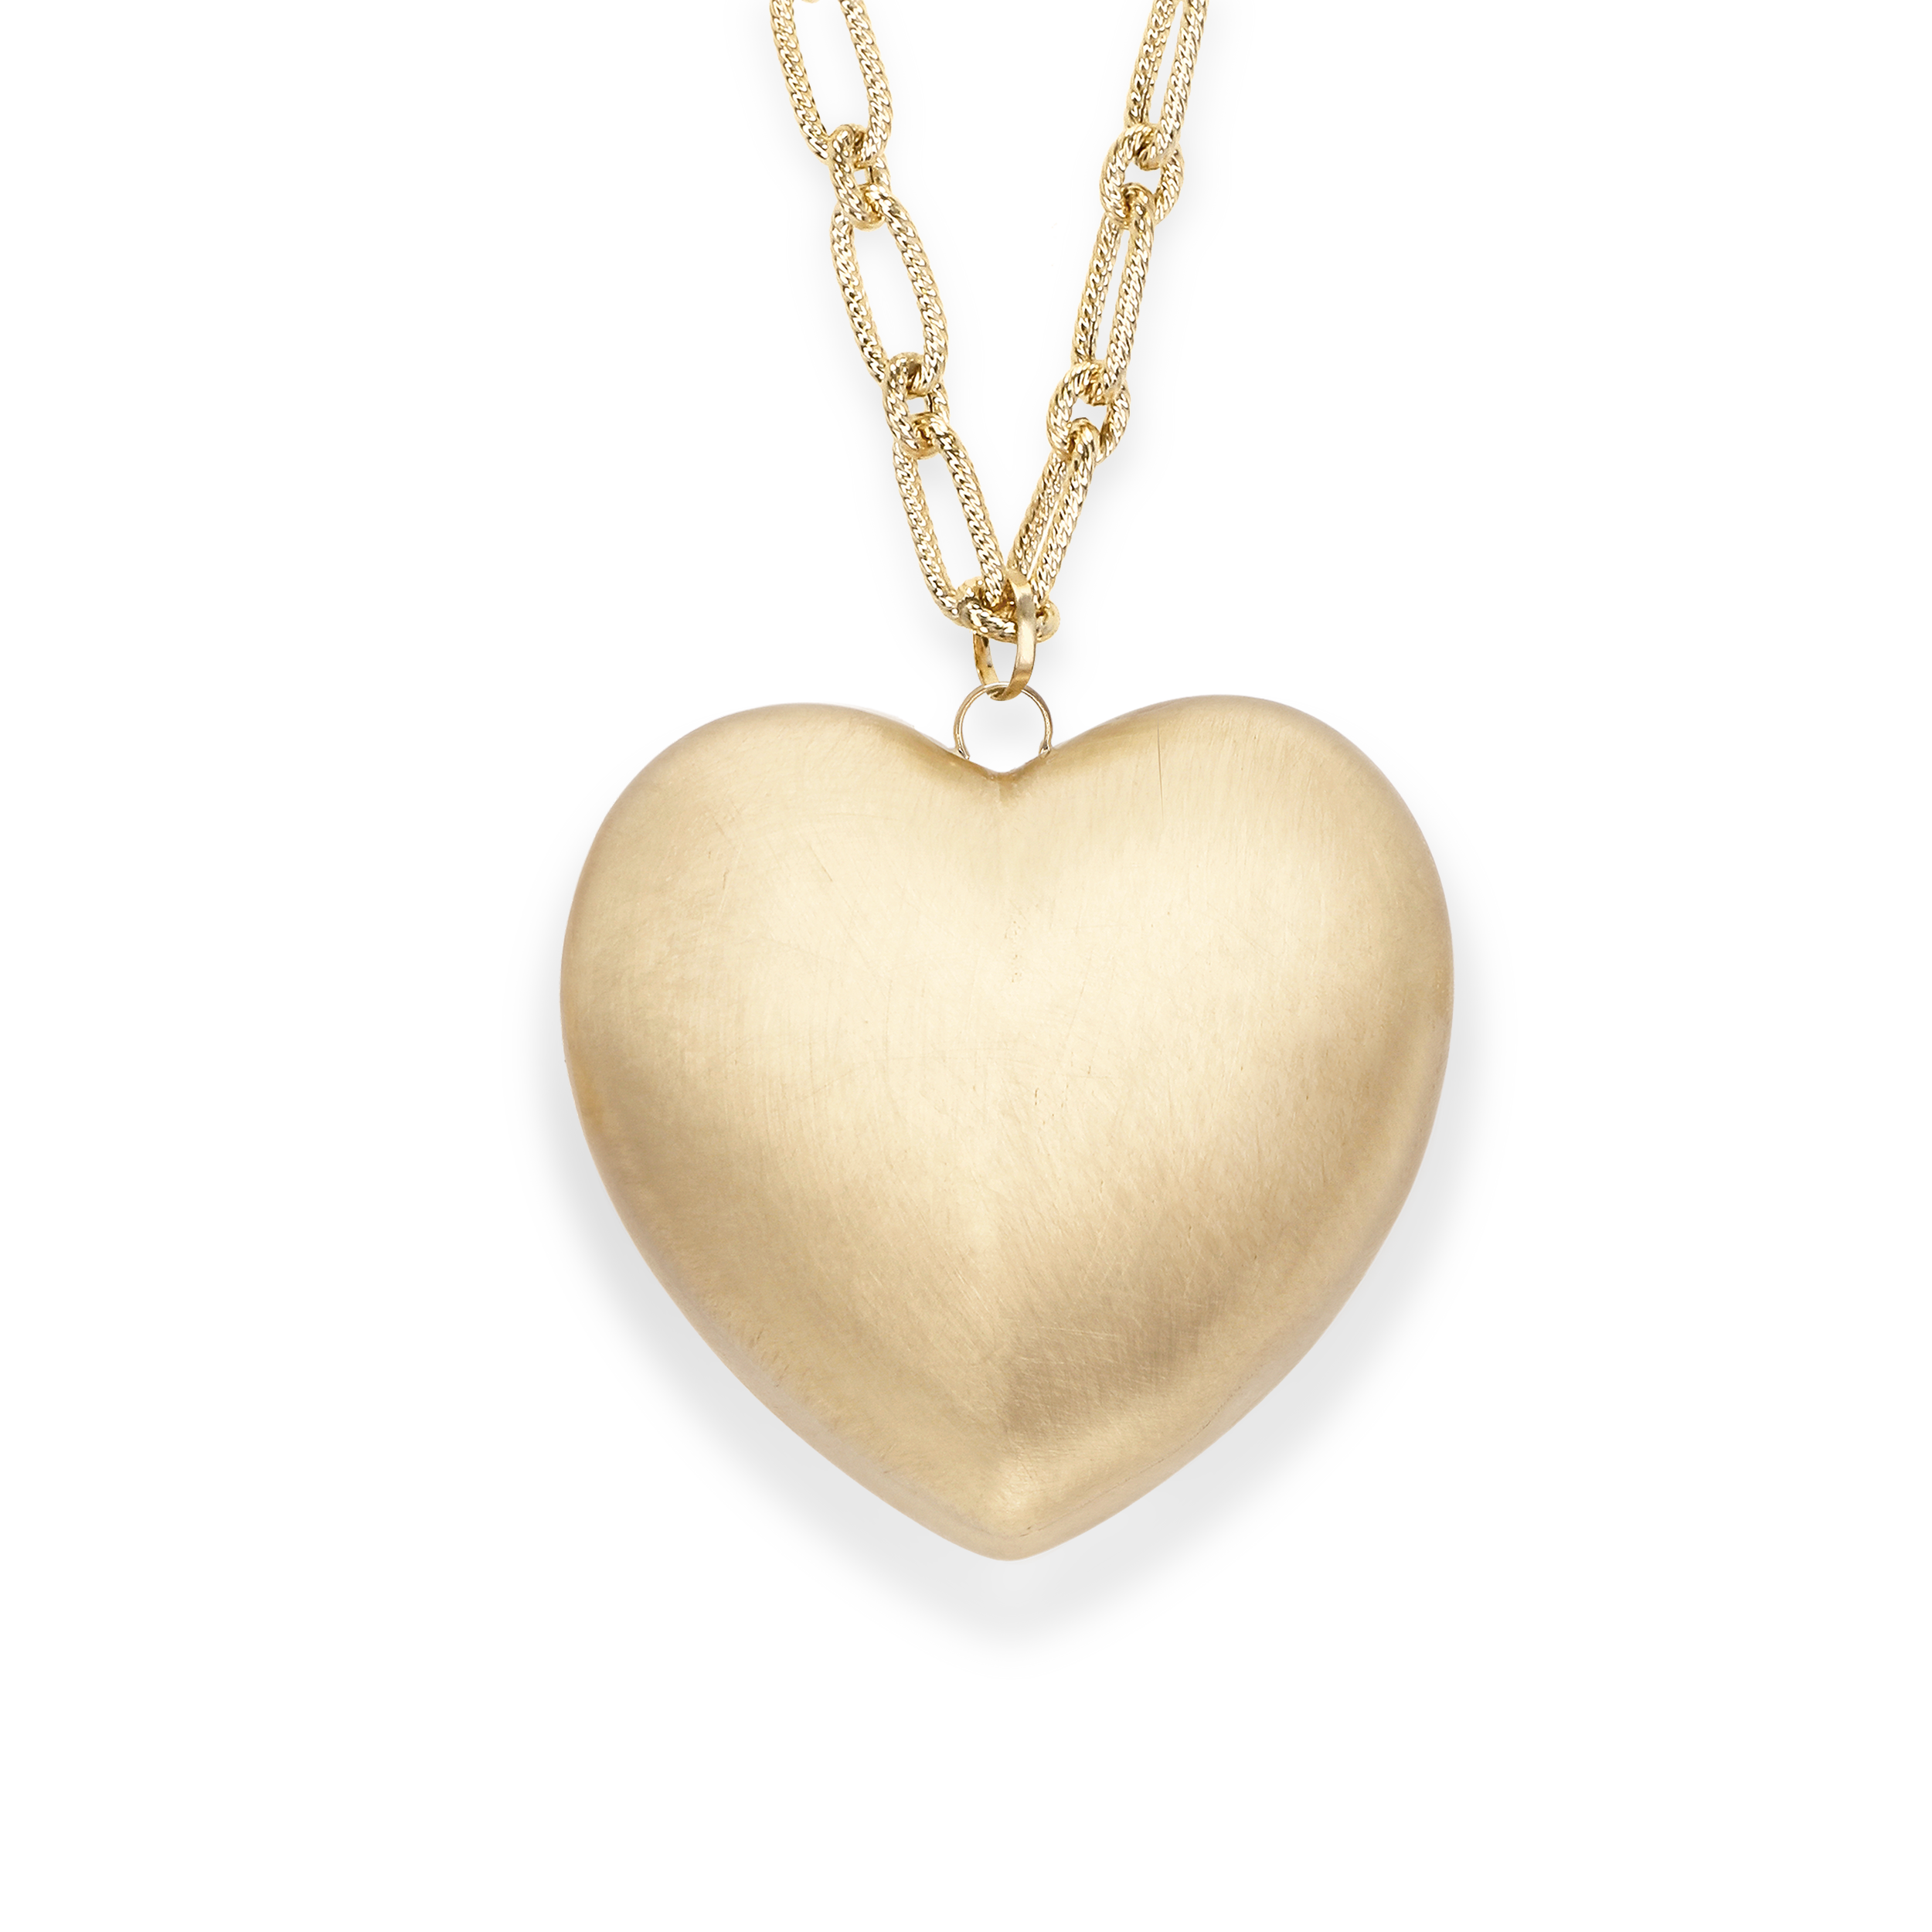 Paulette Brushed Yellow Gold Big Heart on Long Chain Necklace